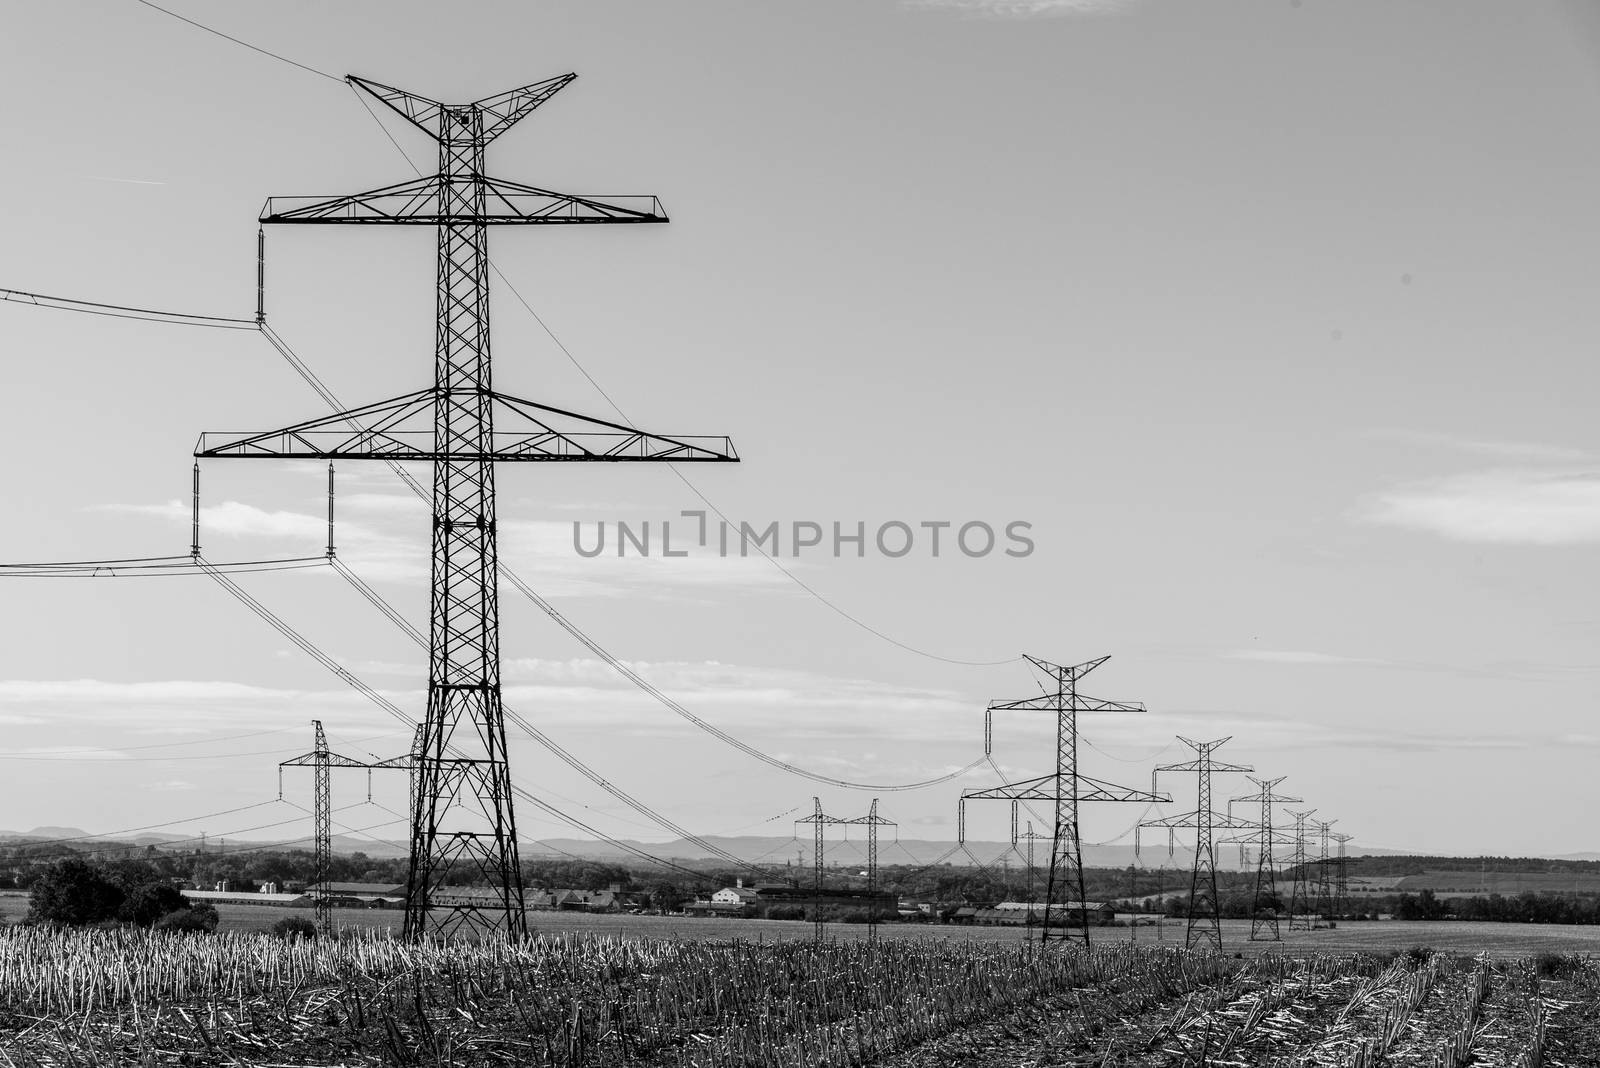 Line of transmission towers, or electricity pylons, in the rural landscape. Black and white image.